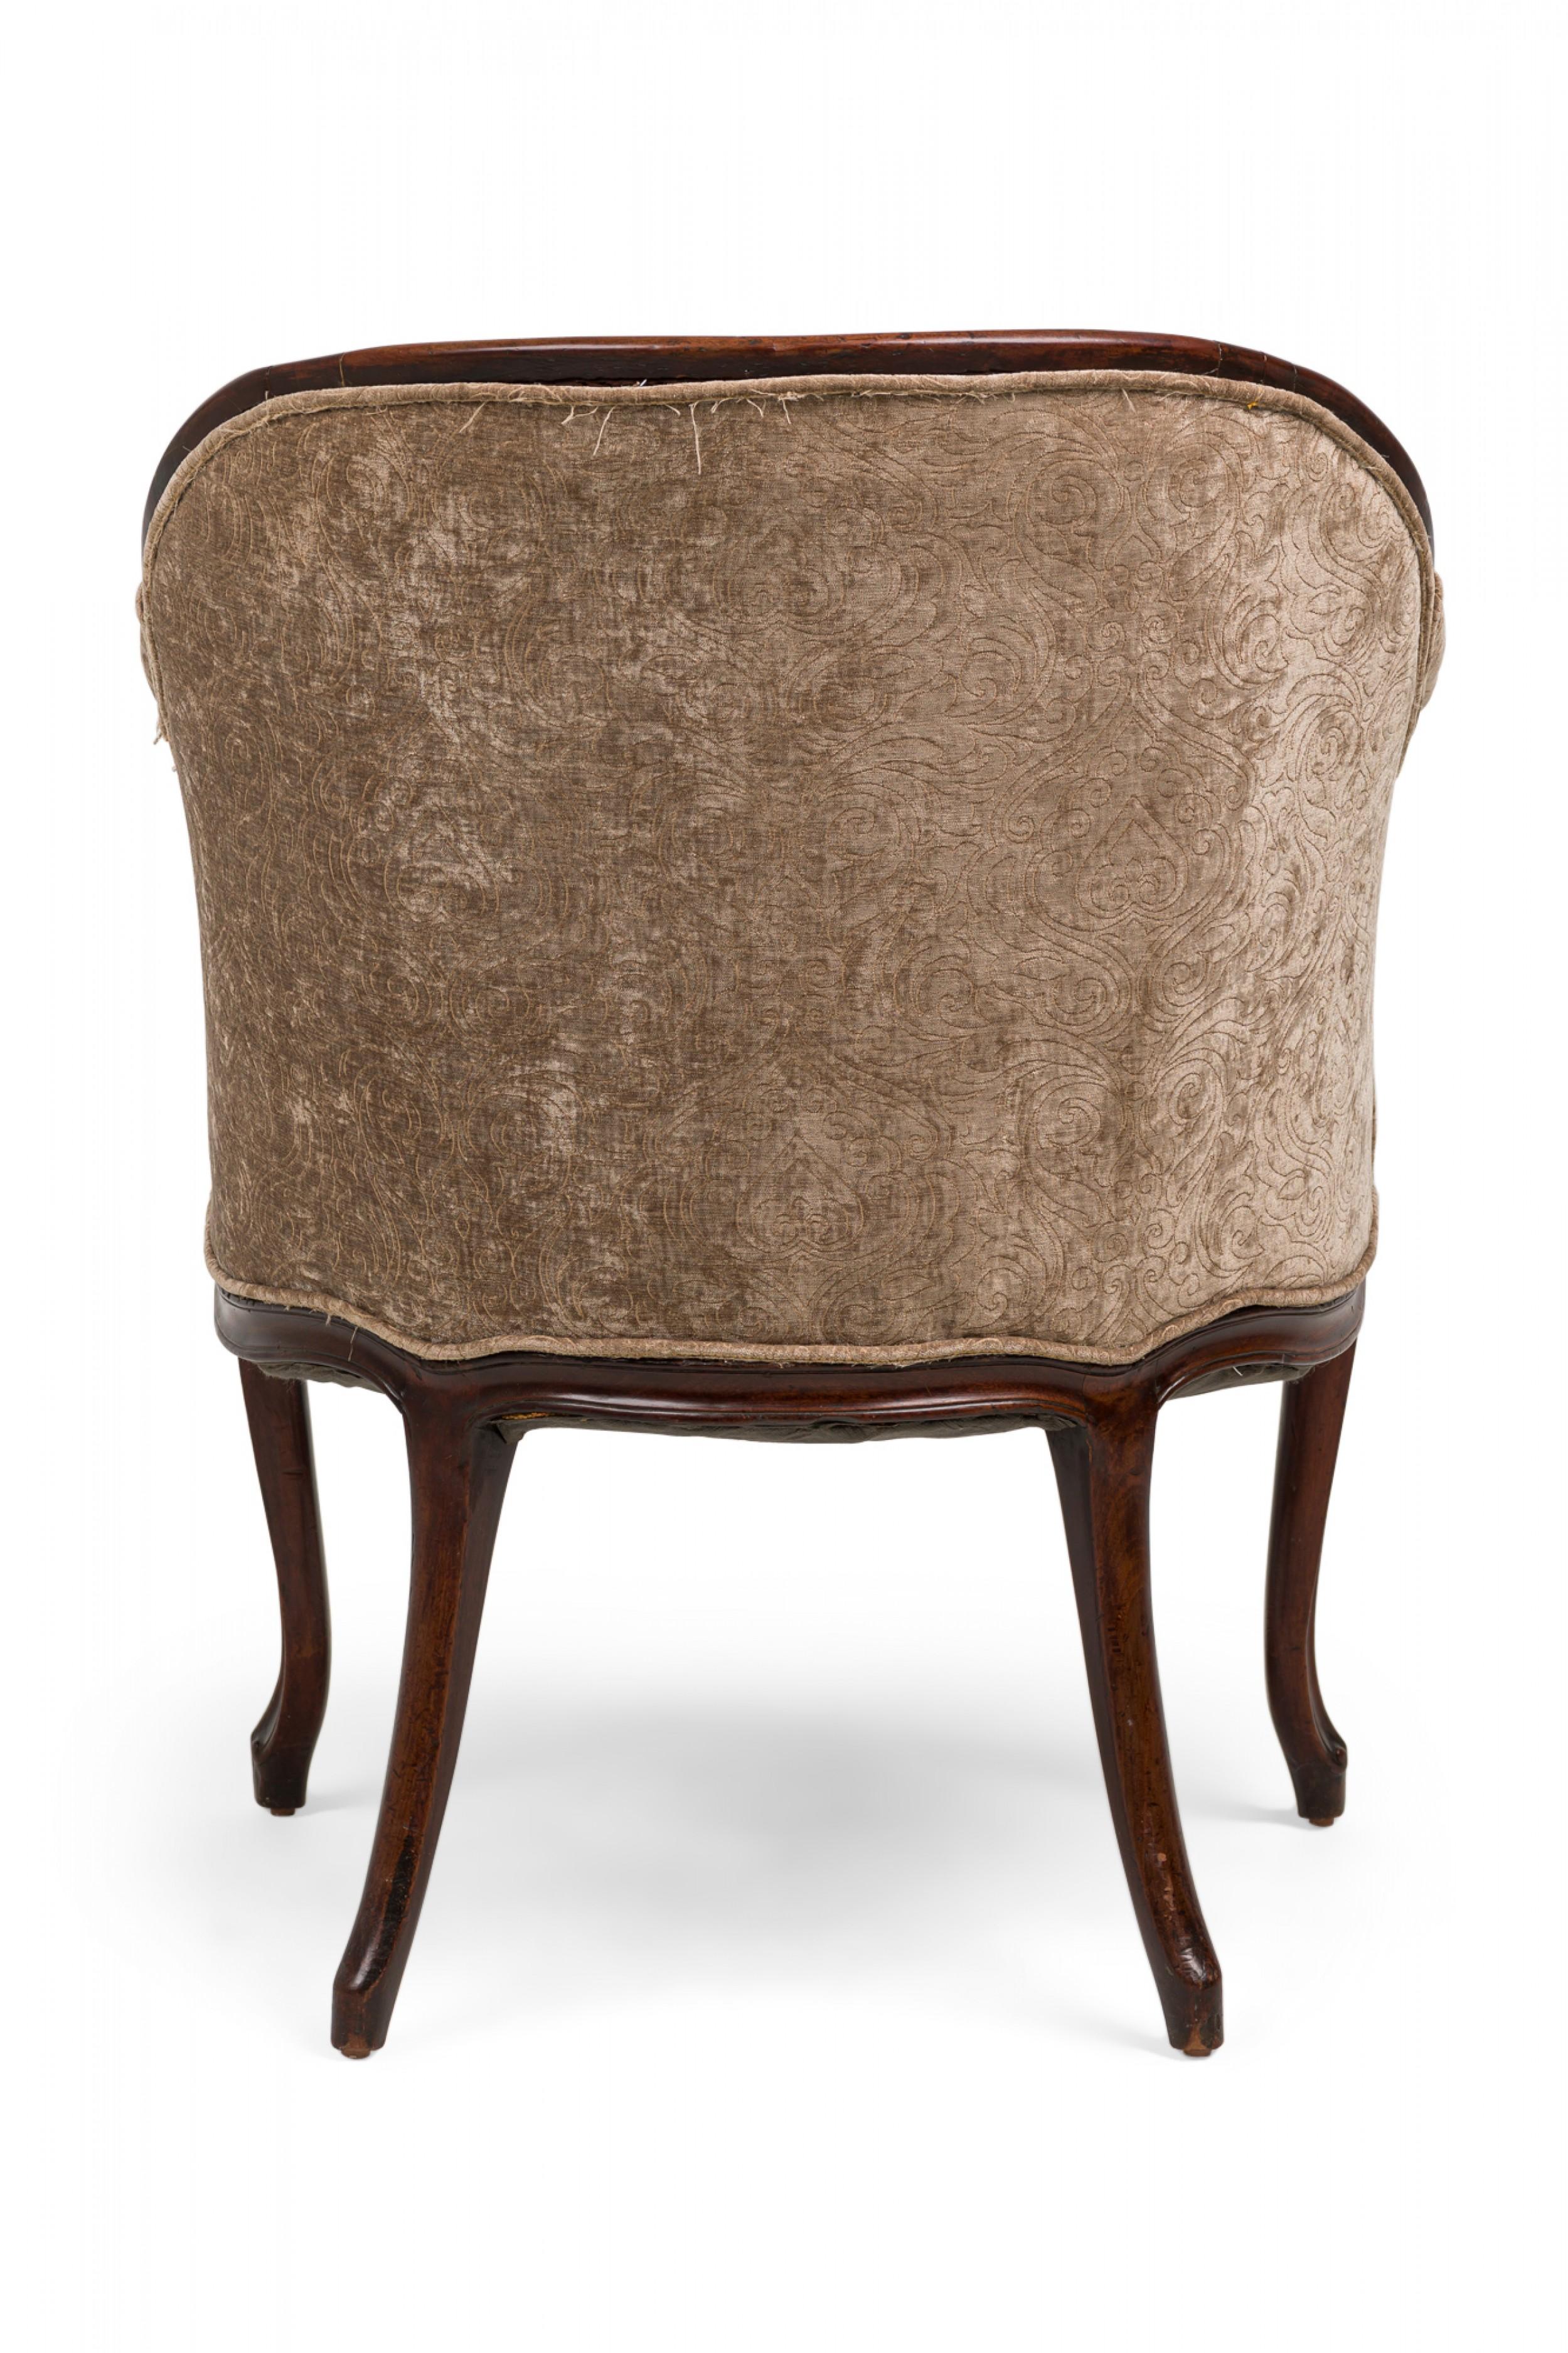 English George III Upholstered Mahogany and Taupe Embroidered Velvet Armchair 1